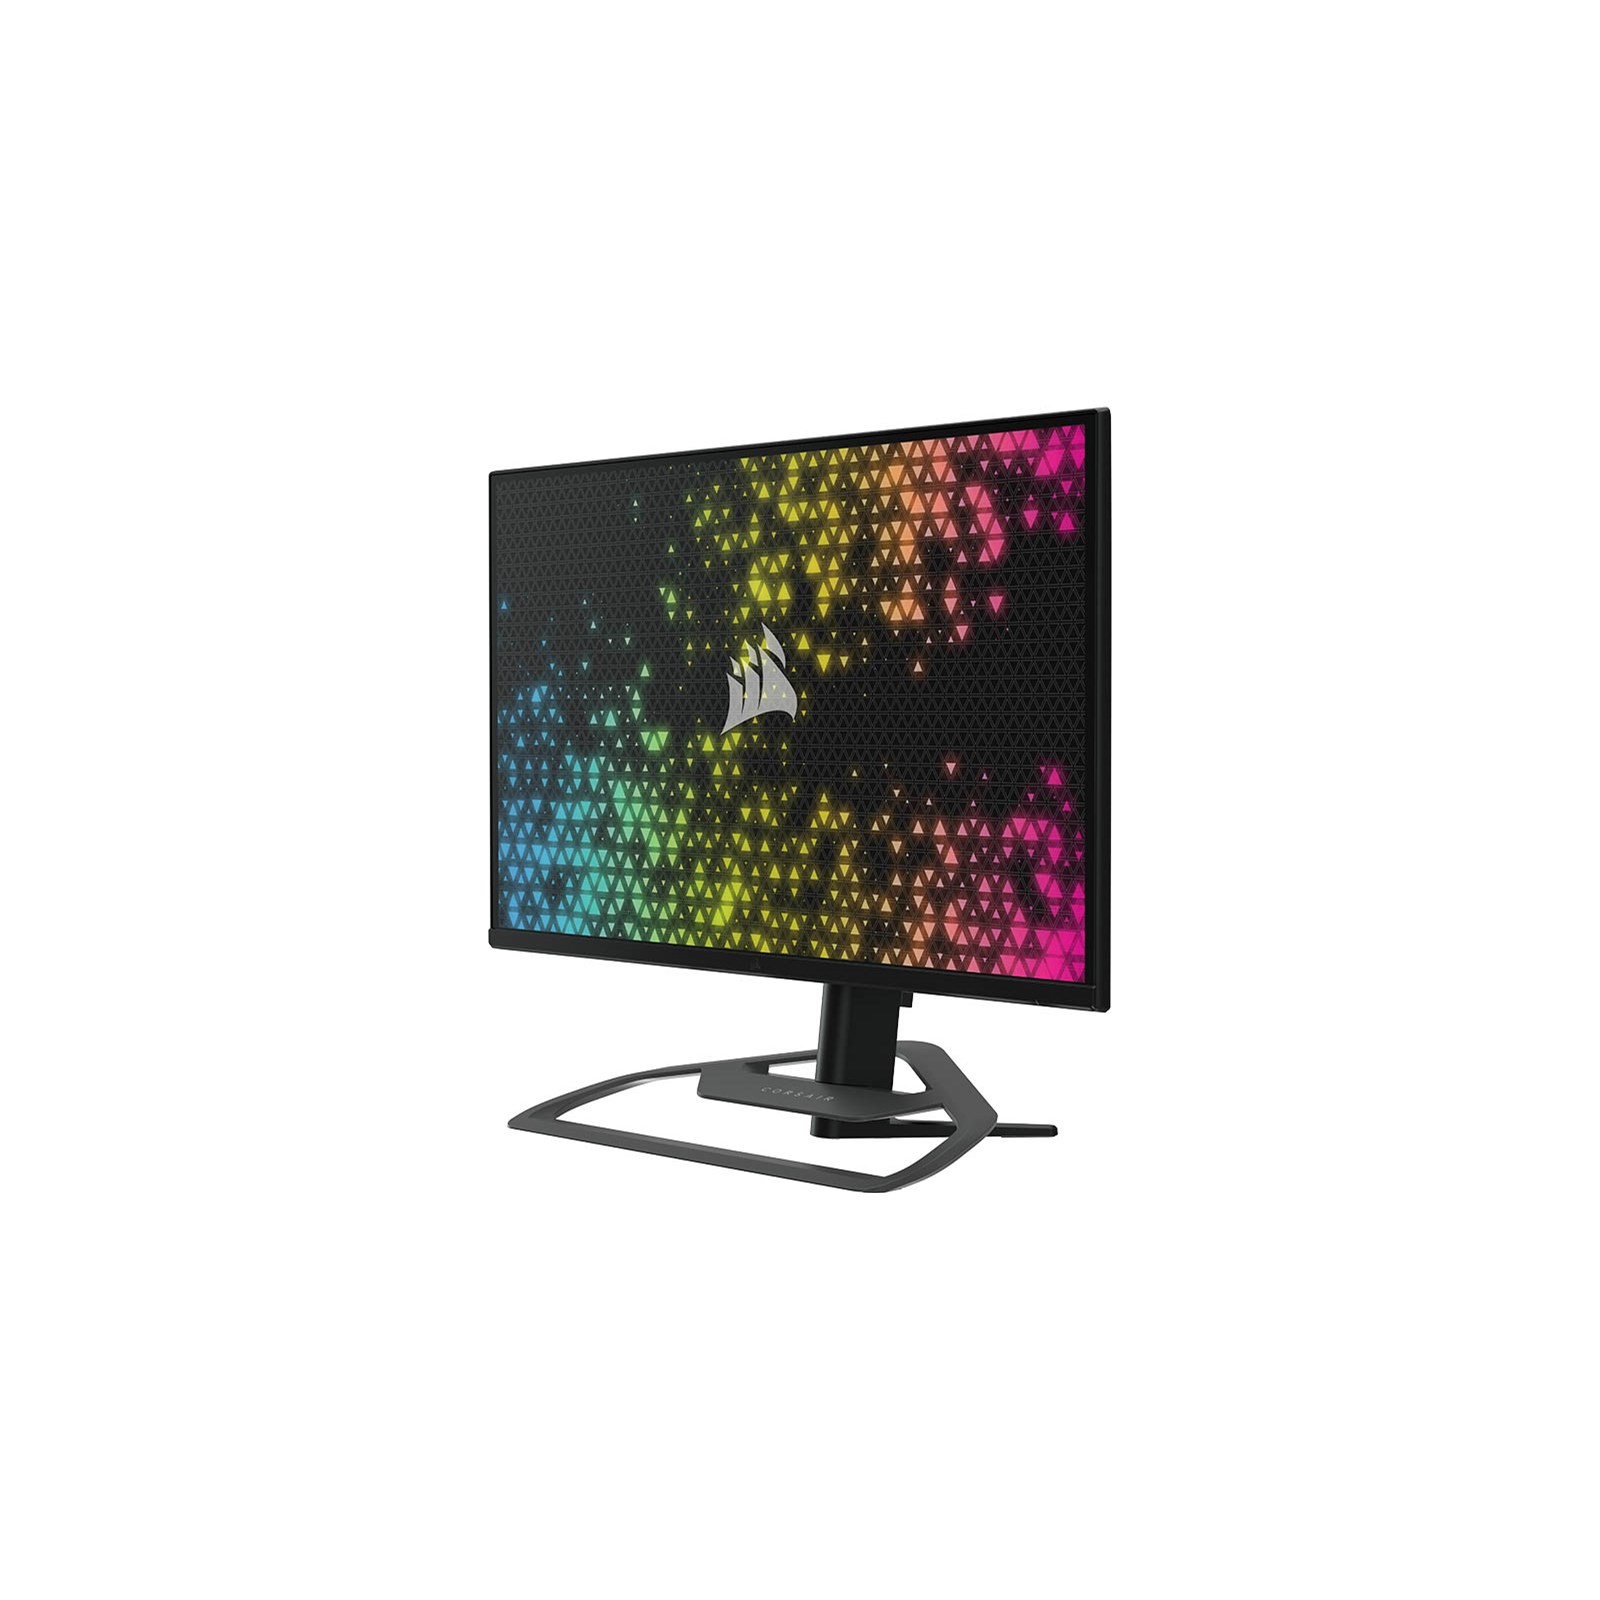 CORSAIR XENEON 32 LCD QHD 165Hz 1ms FreeSync and G-SYNC Compatible Gaming  Monitor with HDR (HDMI, USB, DisplayPort) Black CM-9020007-NA - Best Buy